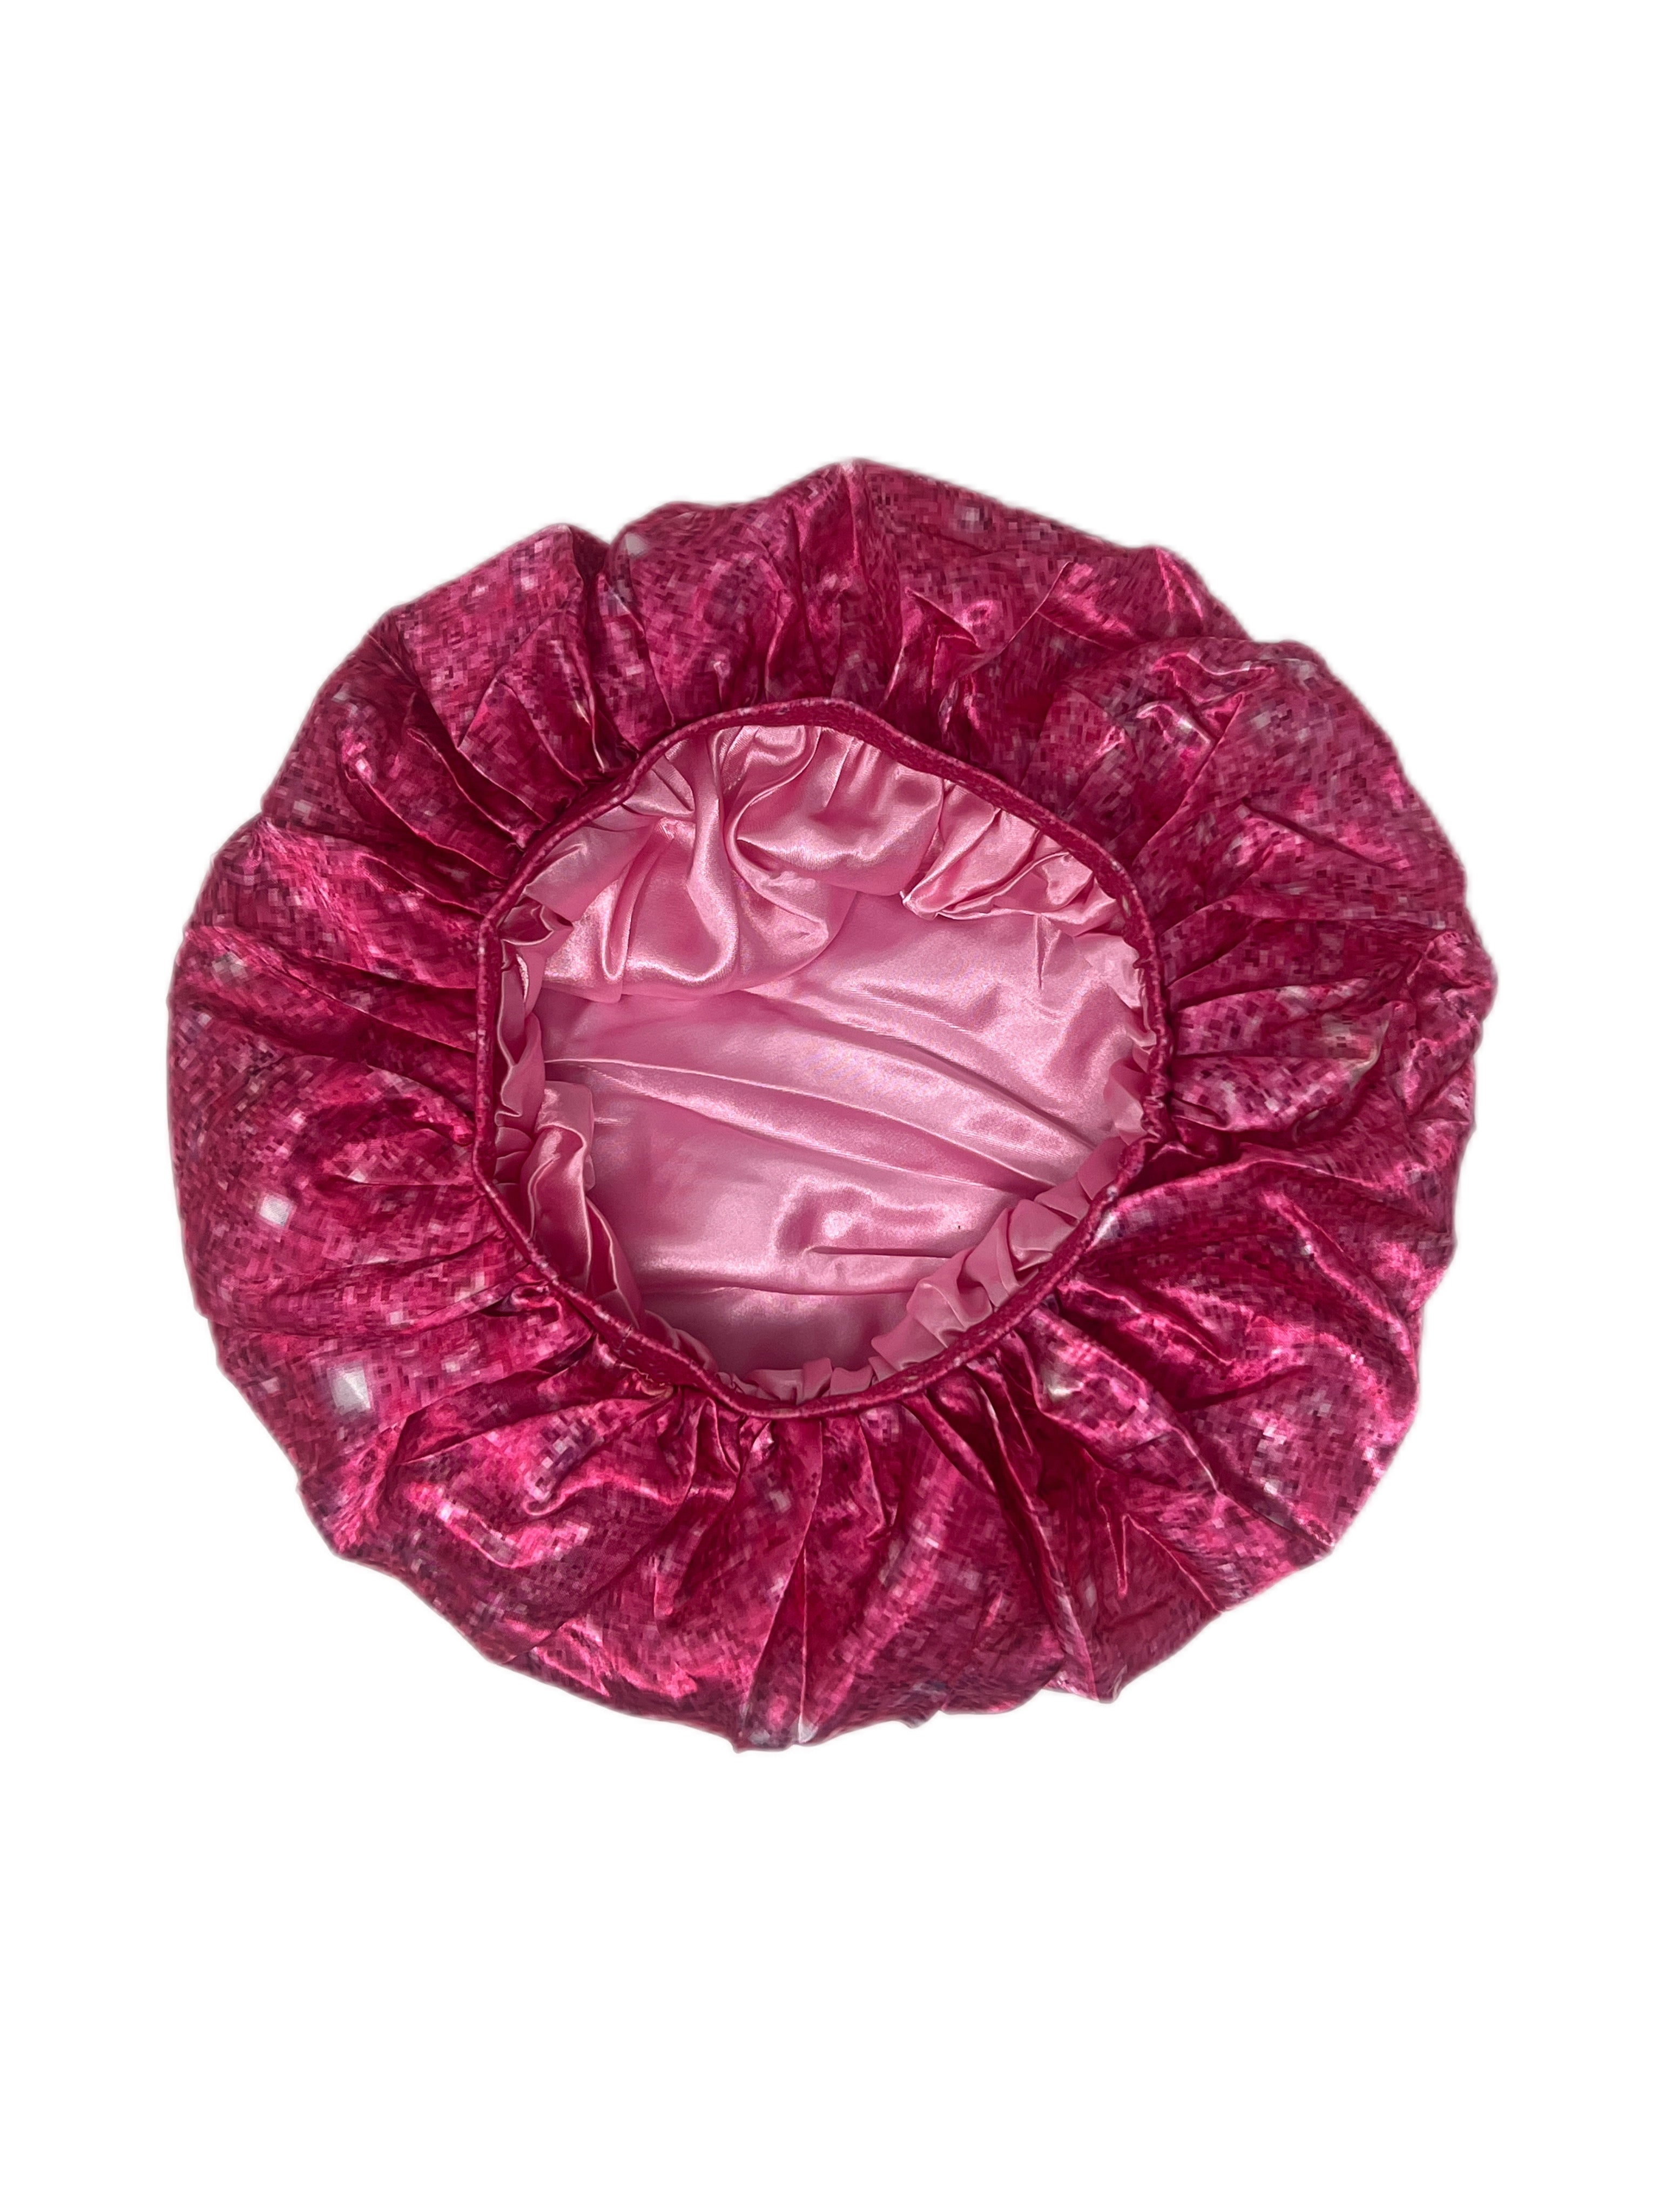 Crushed Pink Satin Bonnet - Double R Rags